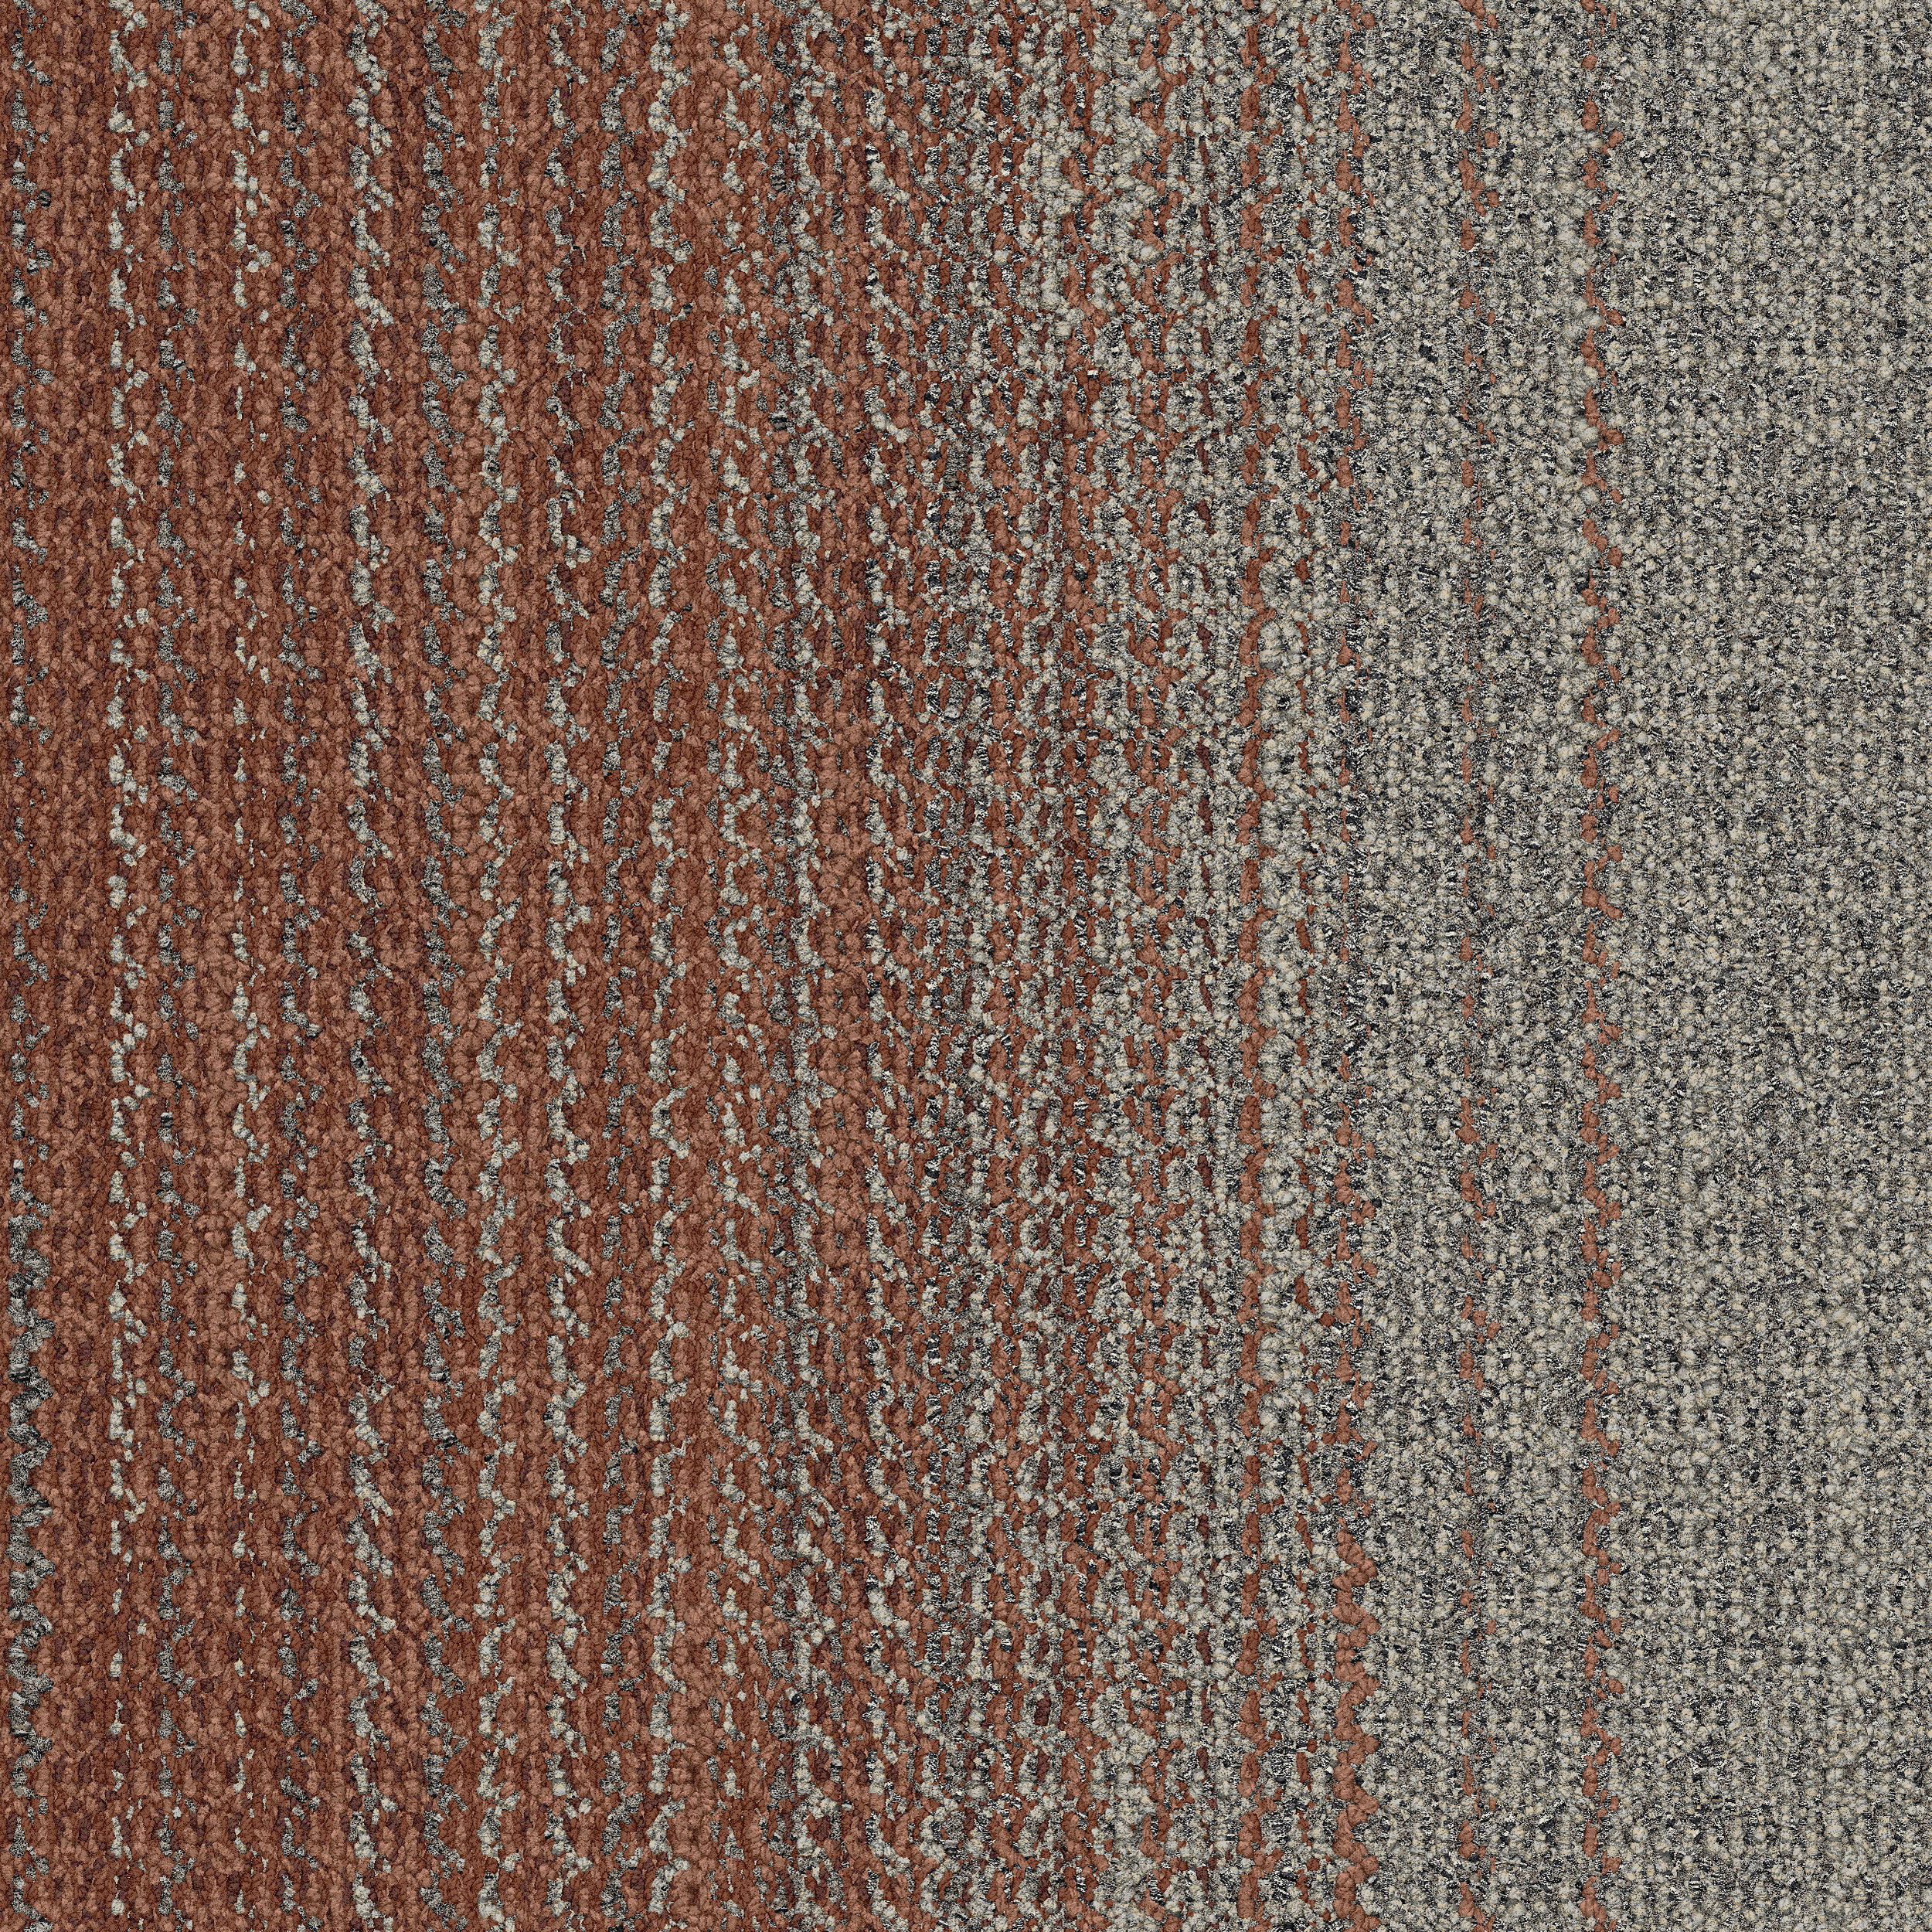 Interface WG100 and WG200 carpet tile in open office